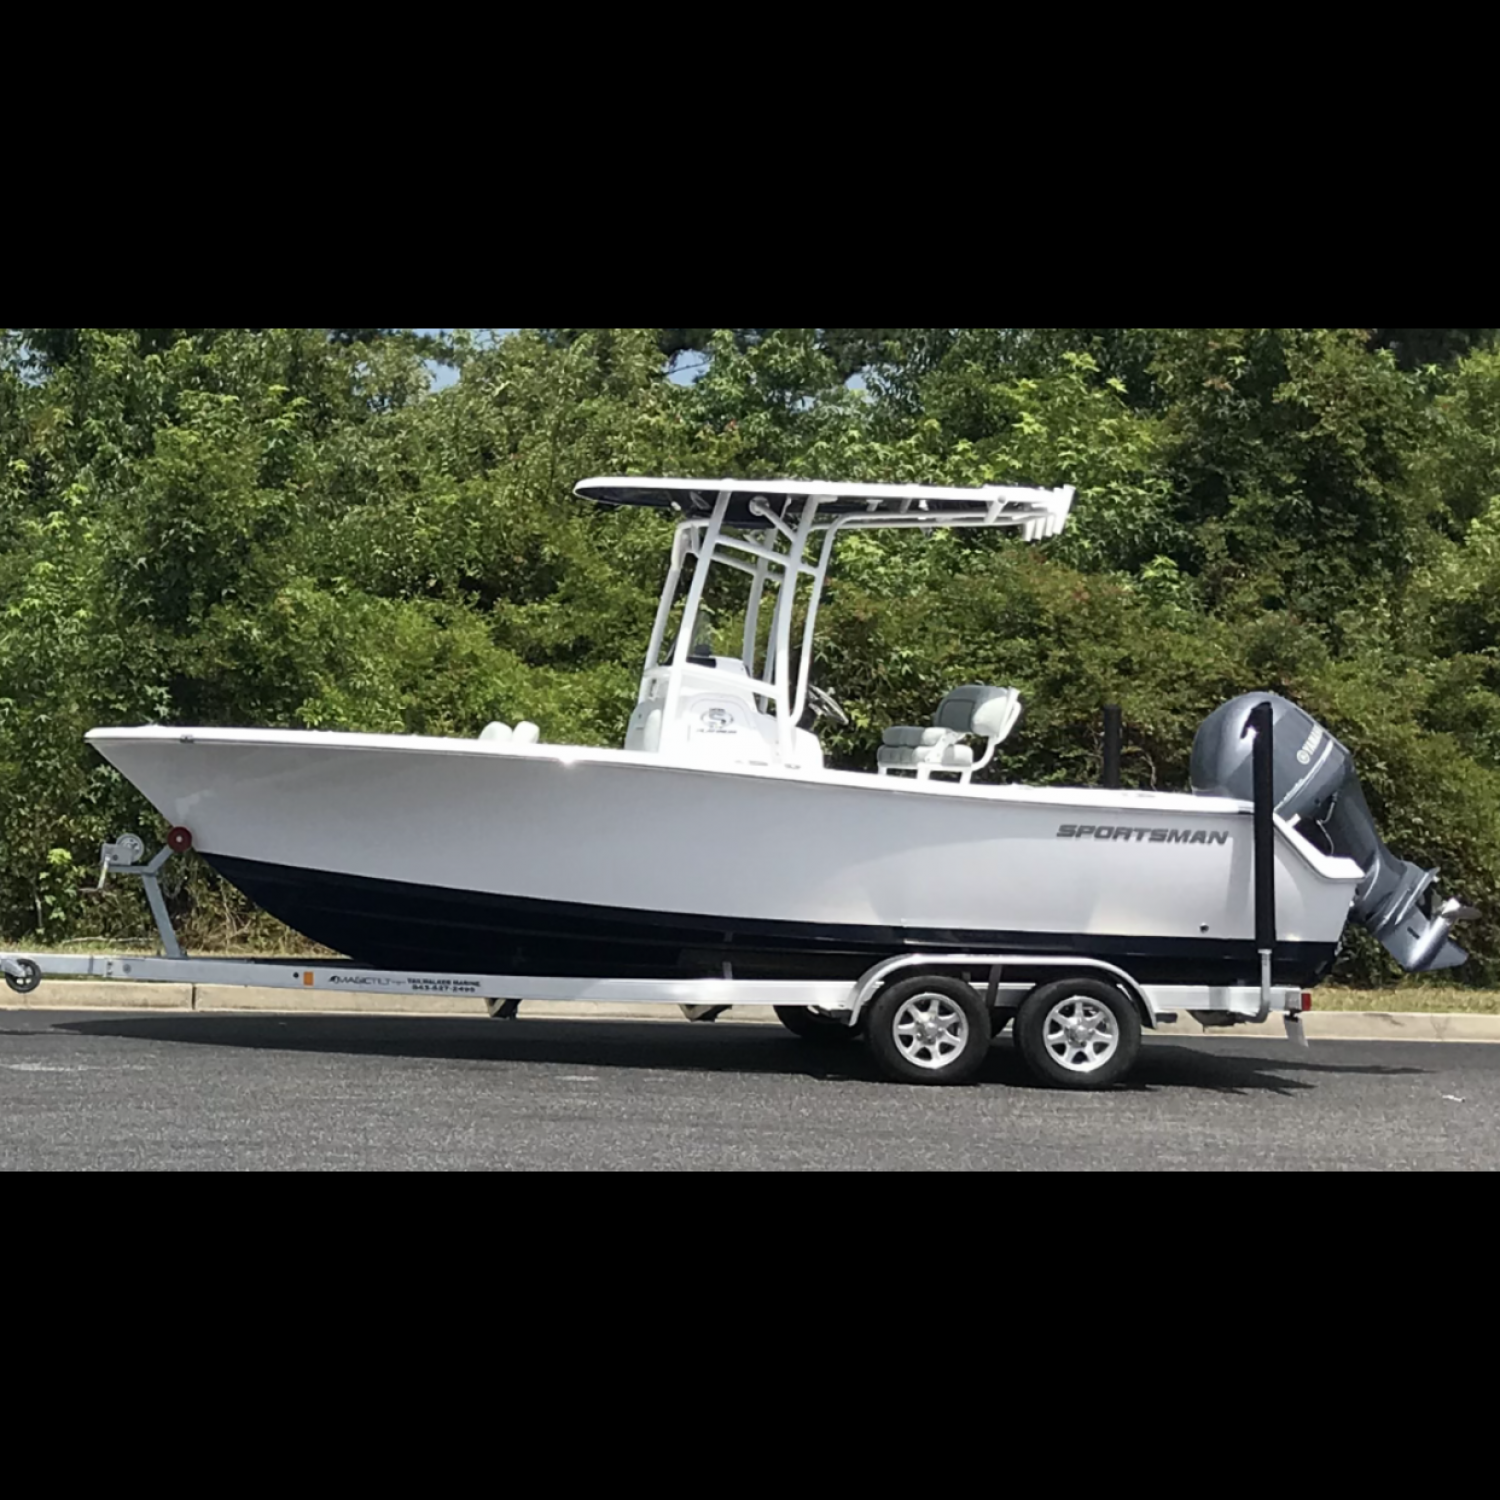 Just picked up my new Open 212. Traded in an Island Reef and couldn’t be happier with my choice! Shout...